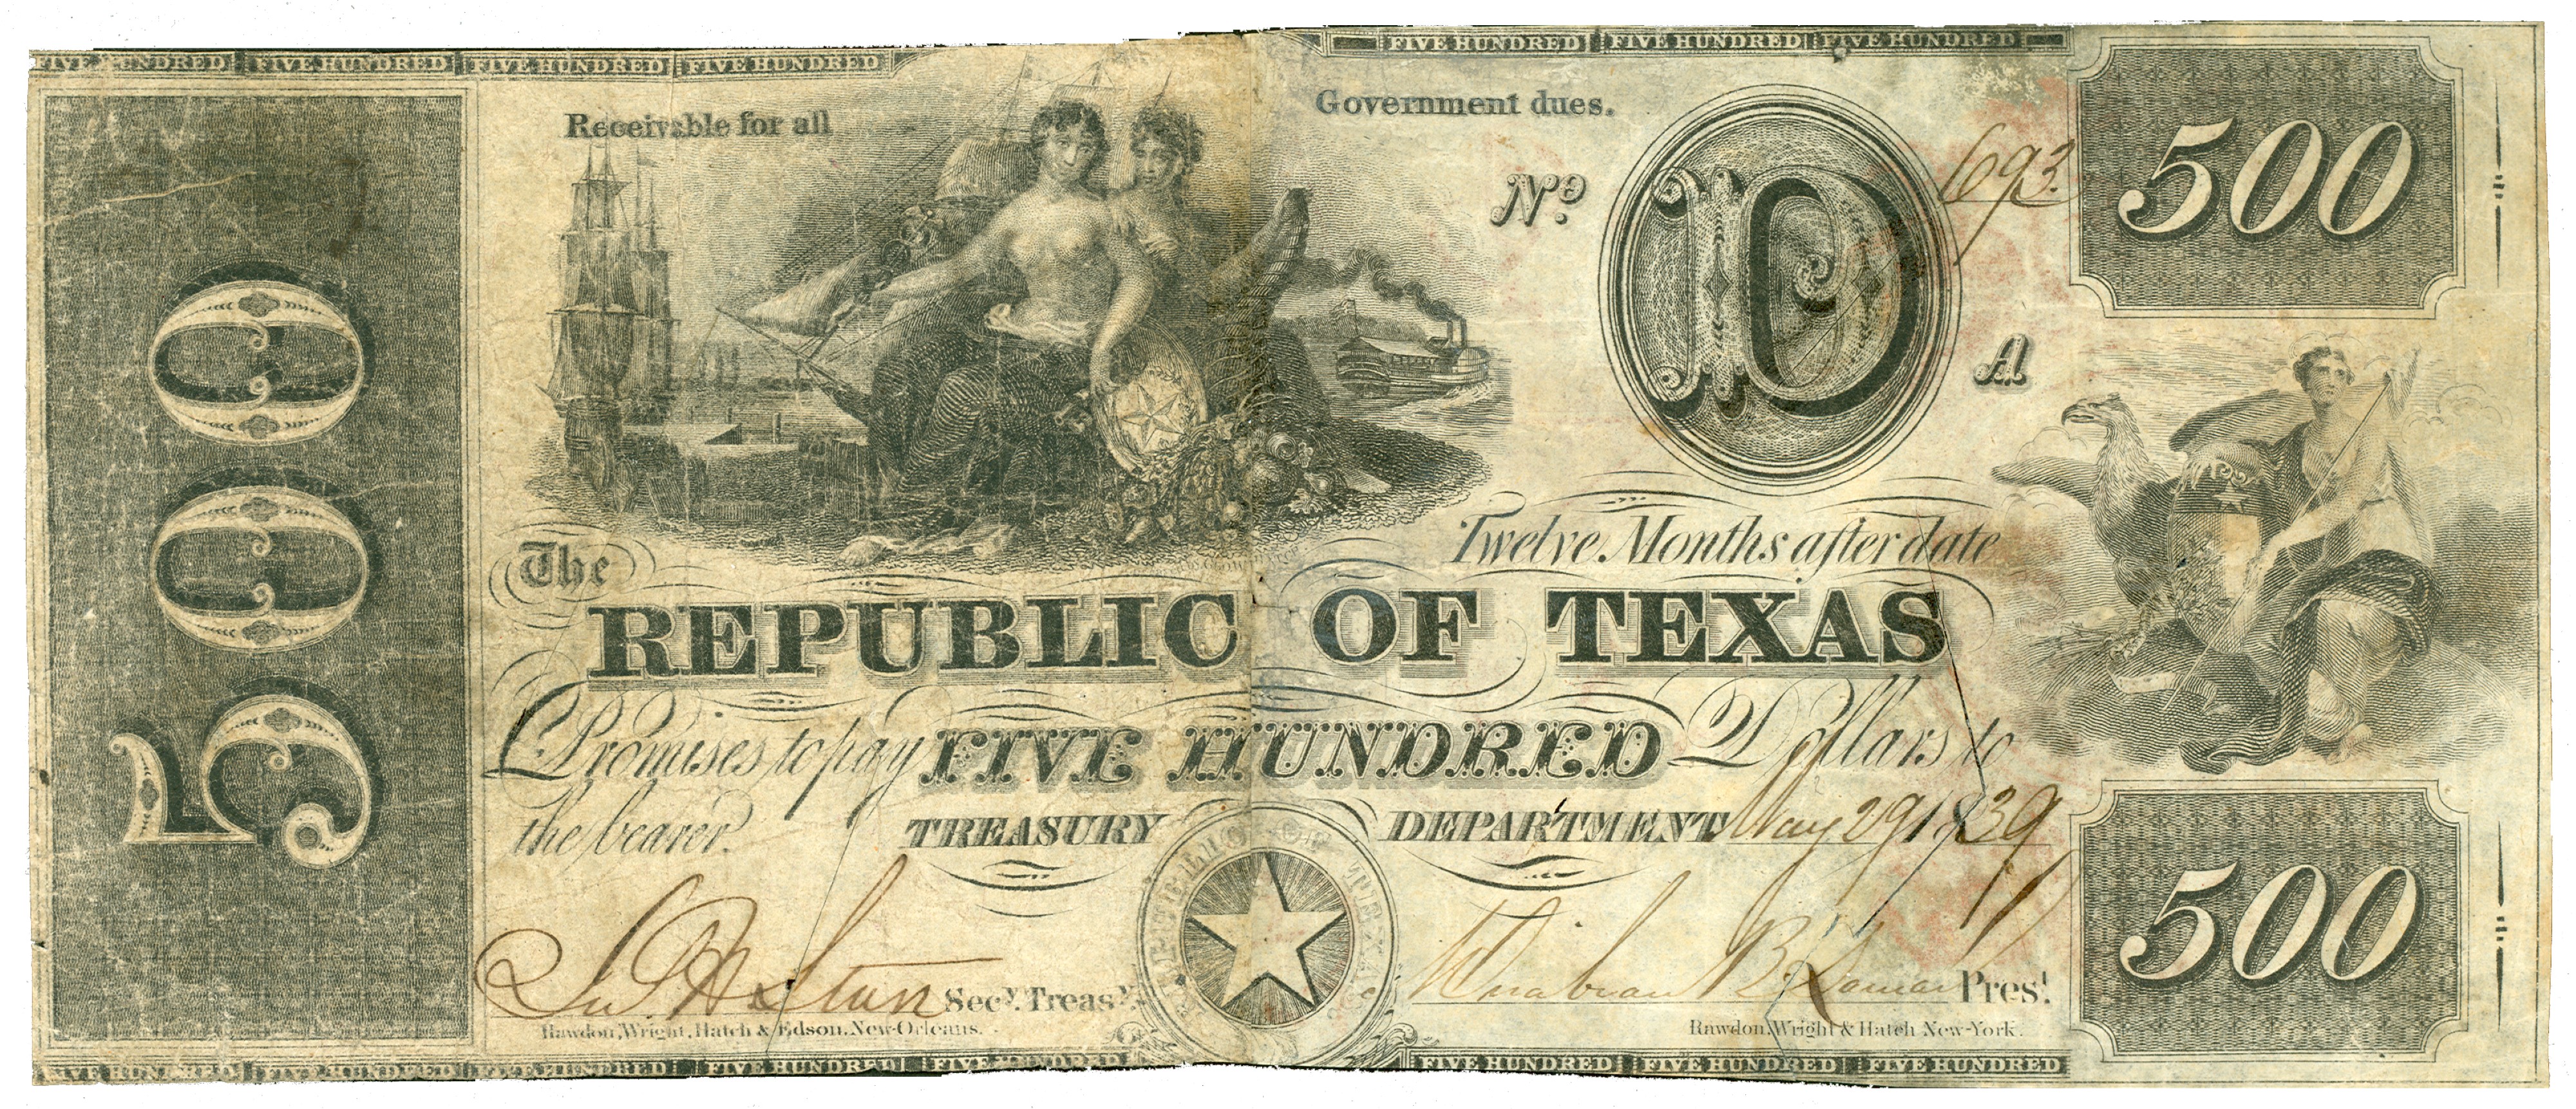 The public can see more than $100 million of numismatic national treasures, including this rare $500 bill issued in Texas in 1839, at the National Money Show in Dallas, March 3 - 5, 2016.